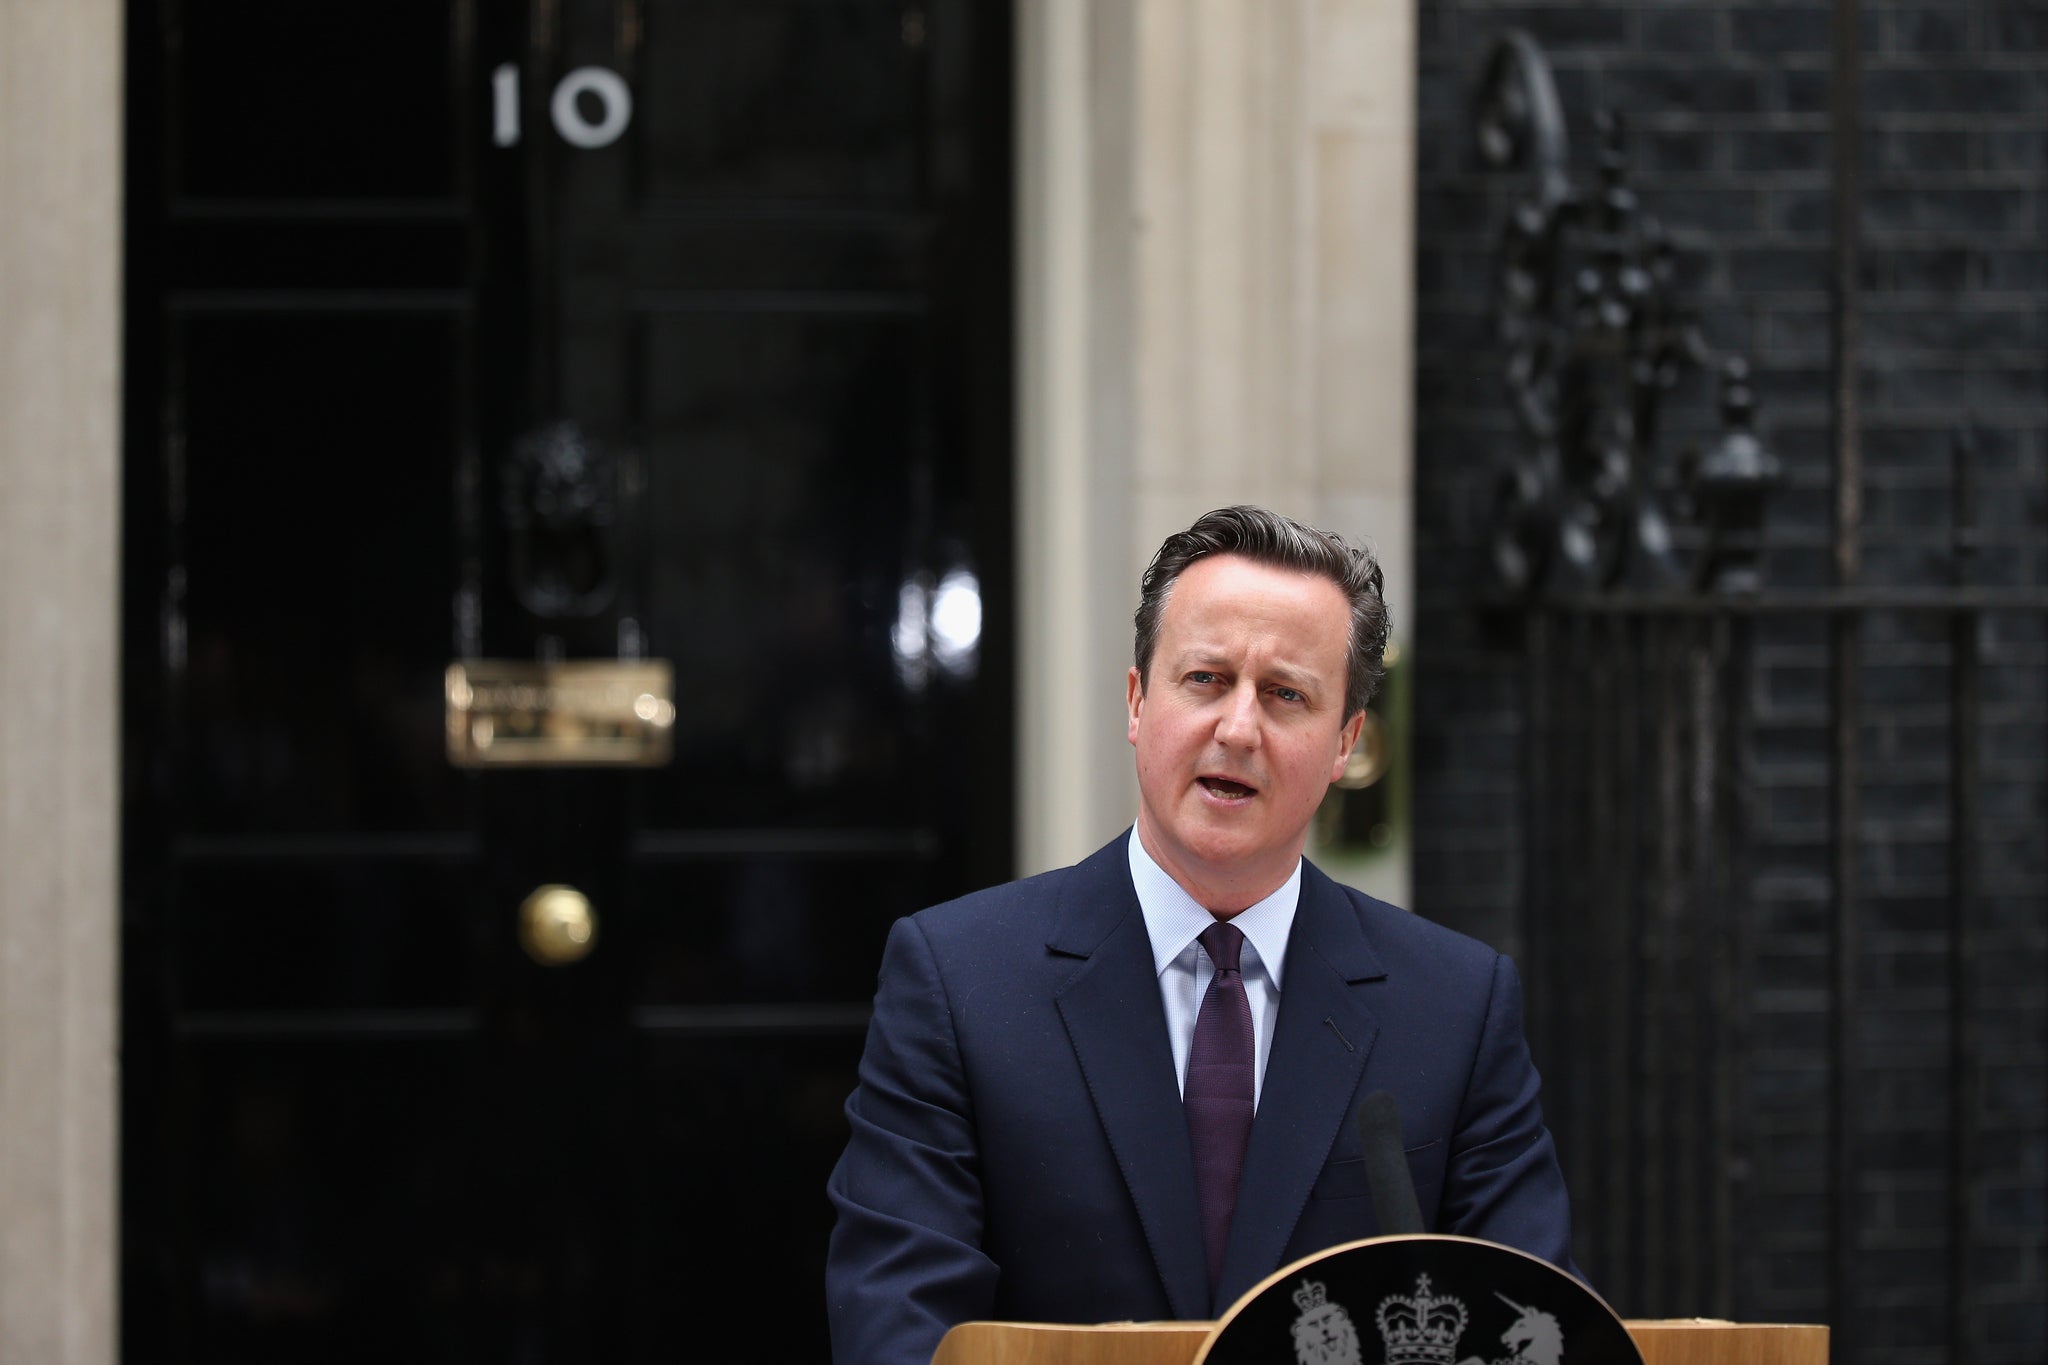 Compared to the stable majority of the last Coalition, Cameron’s tiny majority is a recipe for instability